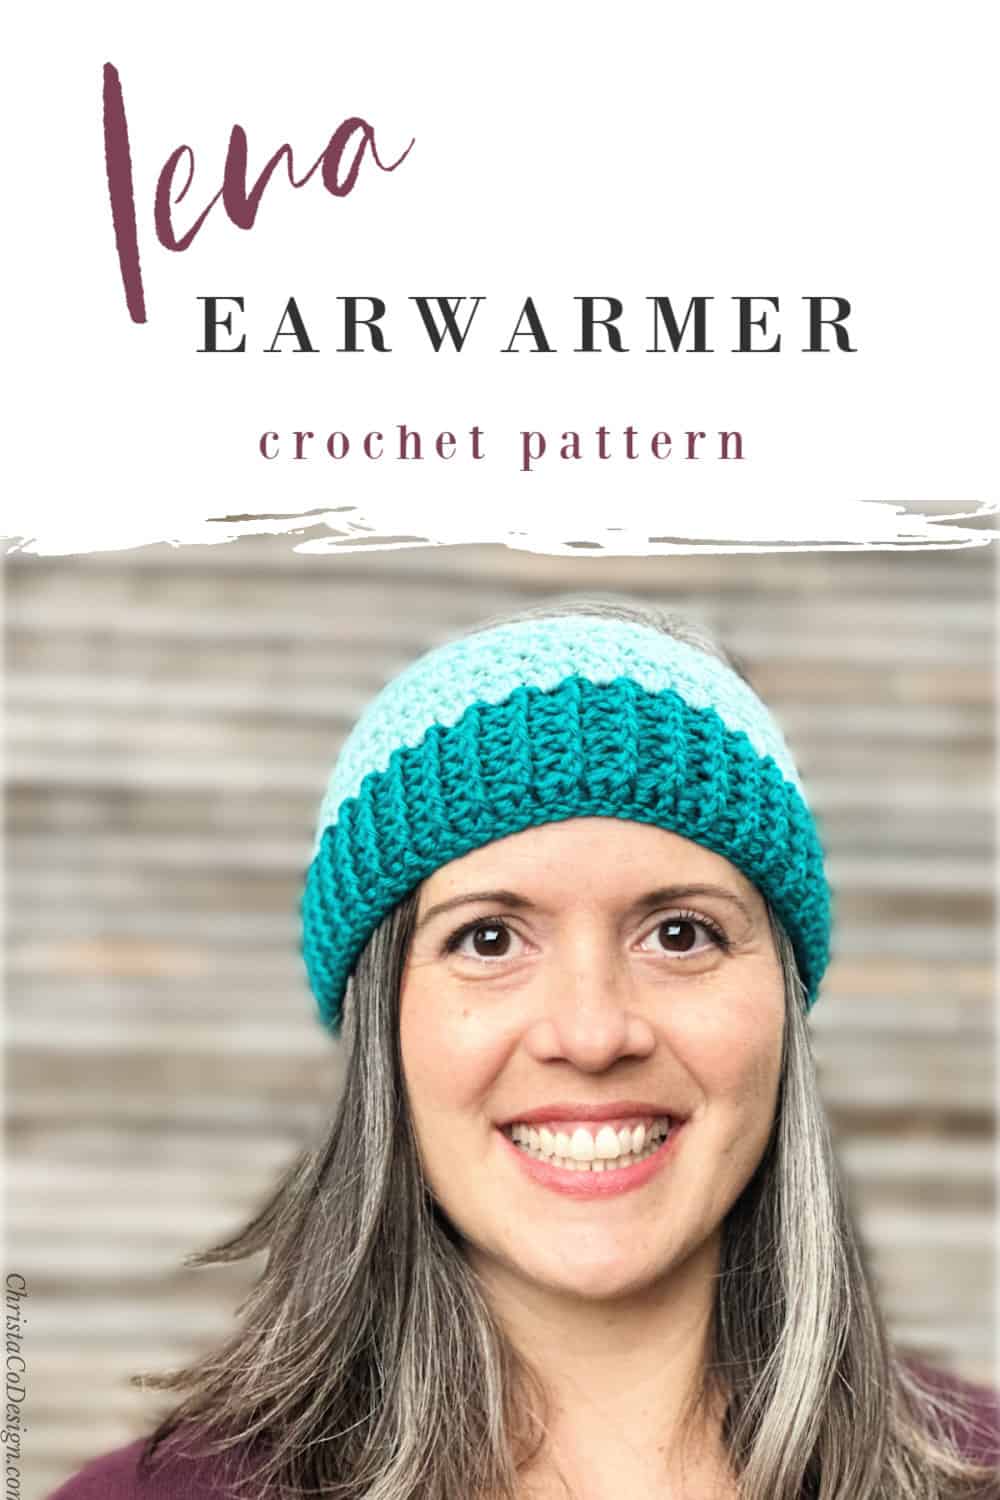 Pin image of Woman wearing teal and blue crochet ear warmer smelling at camera.